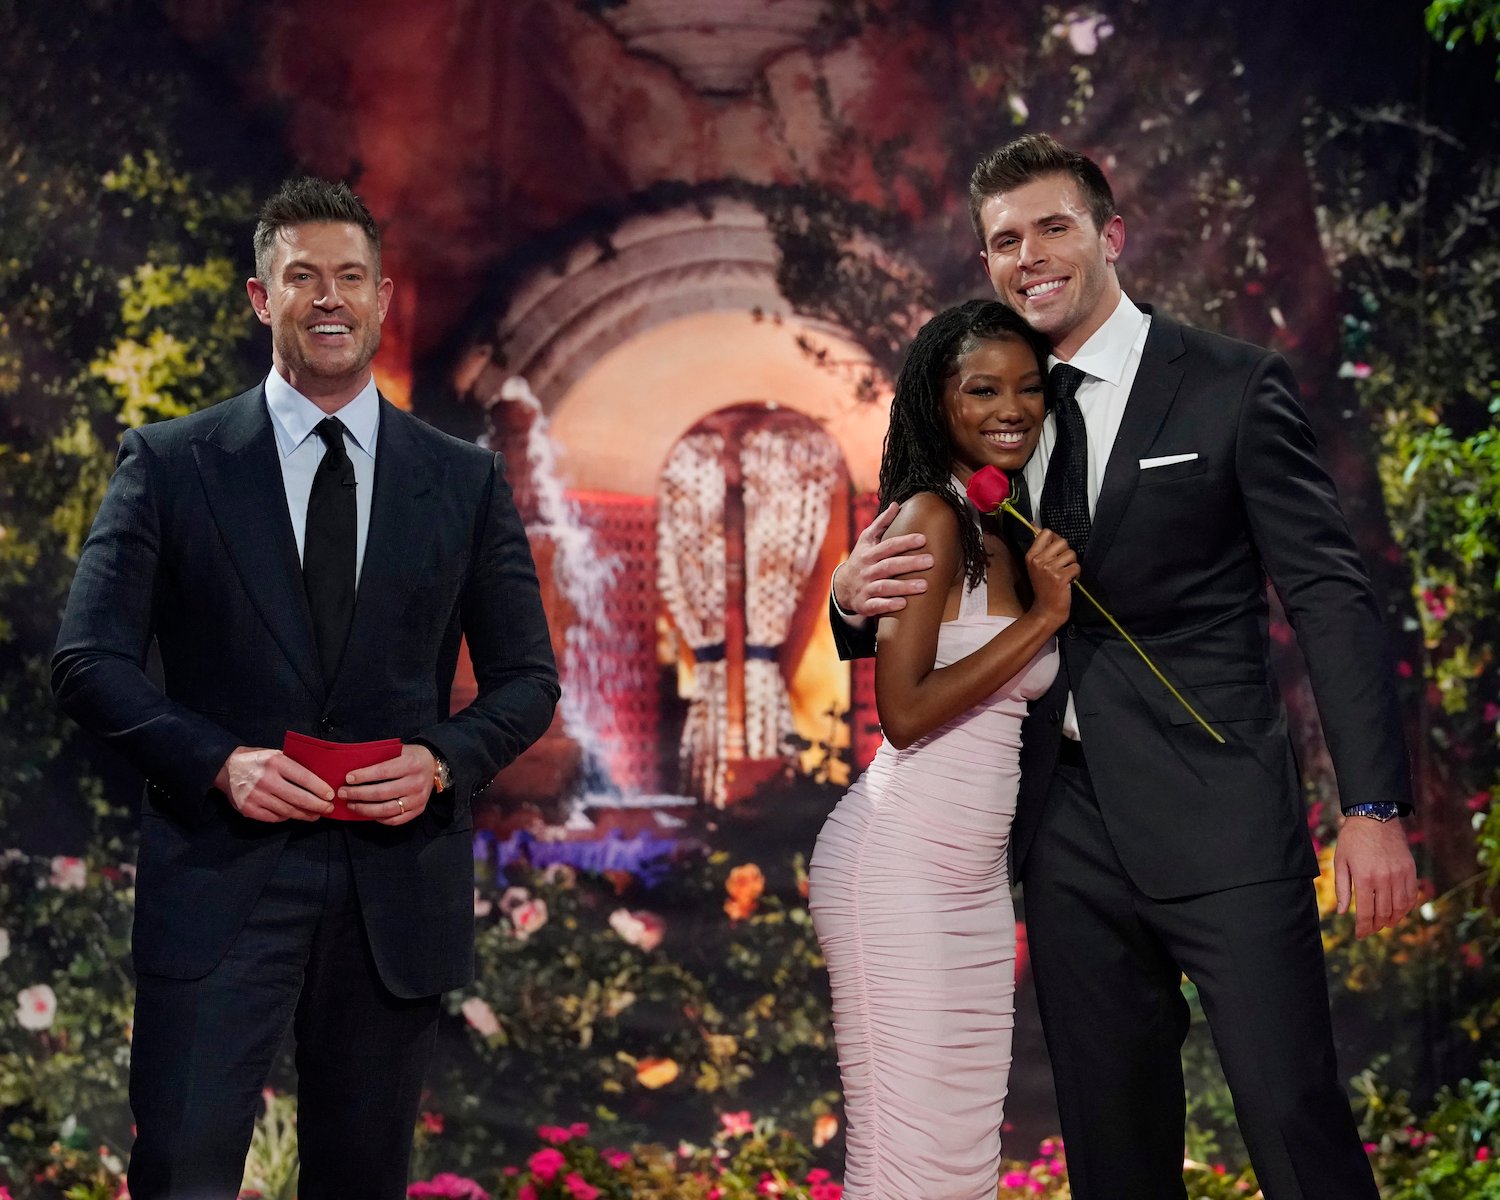 Zach Shalcross, the star of 'The Bachelor' 2023 hugs Brianna Thorbourne on stage the 'The Bachelorette: After the Final Rose' special.